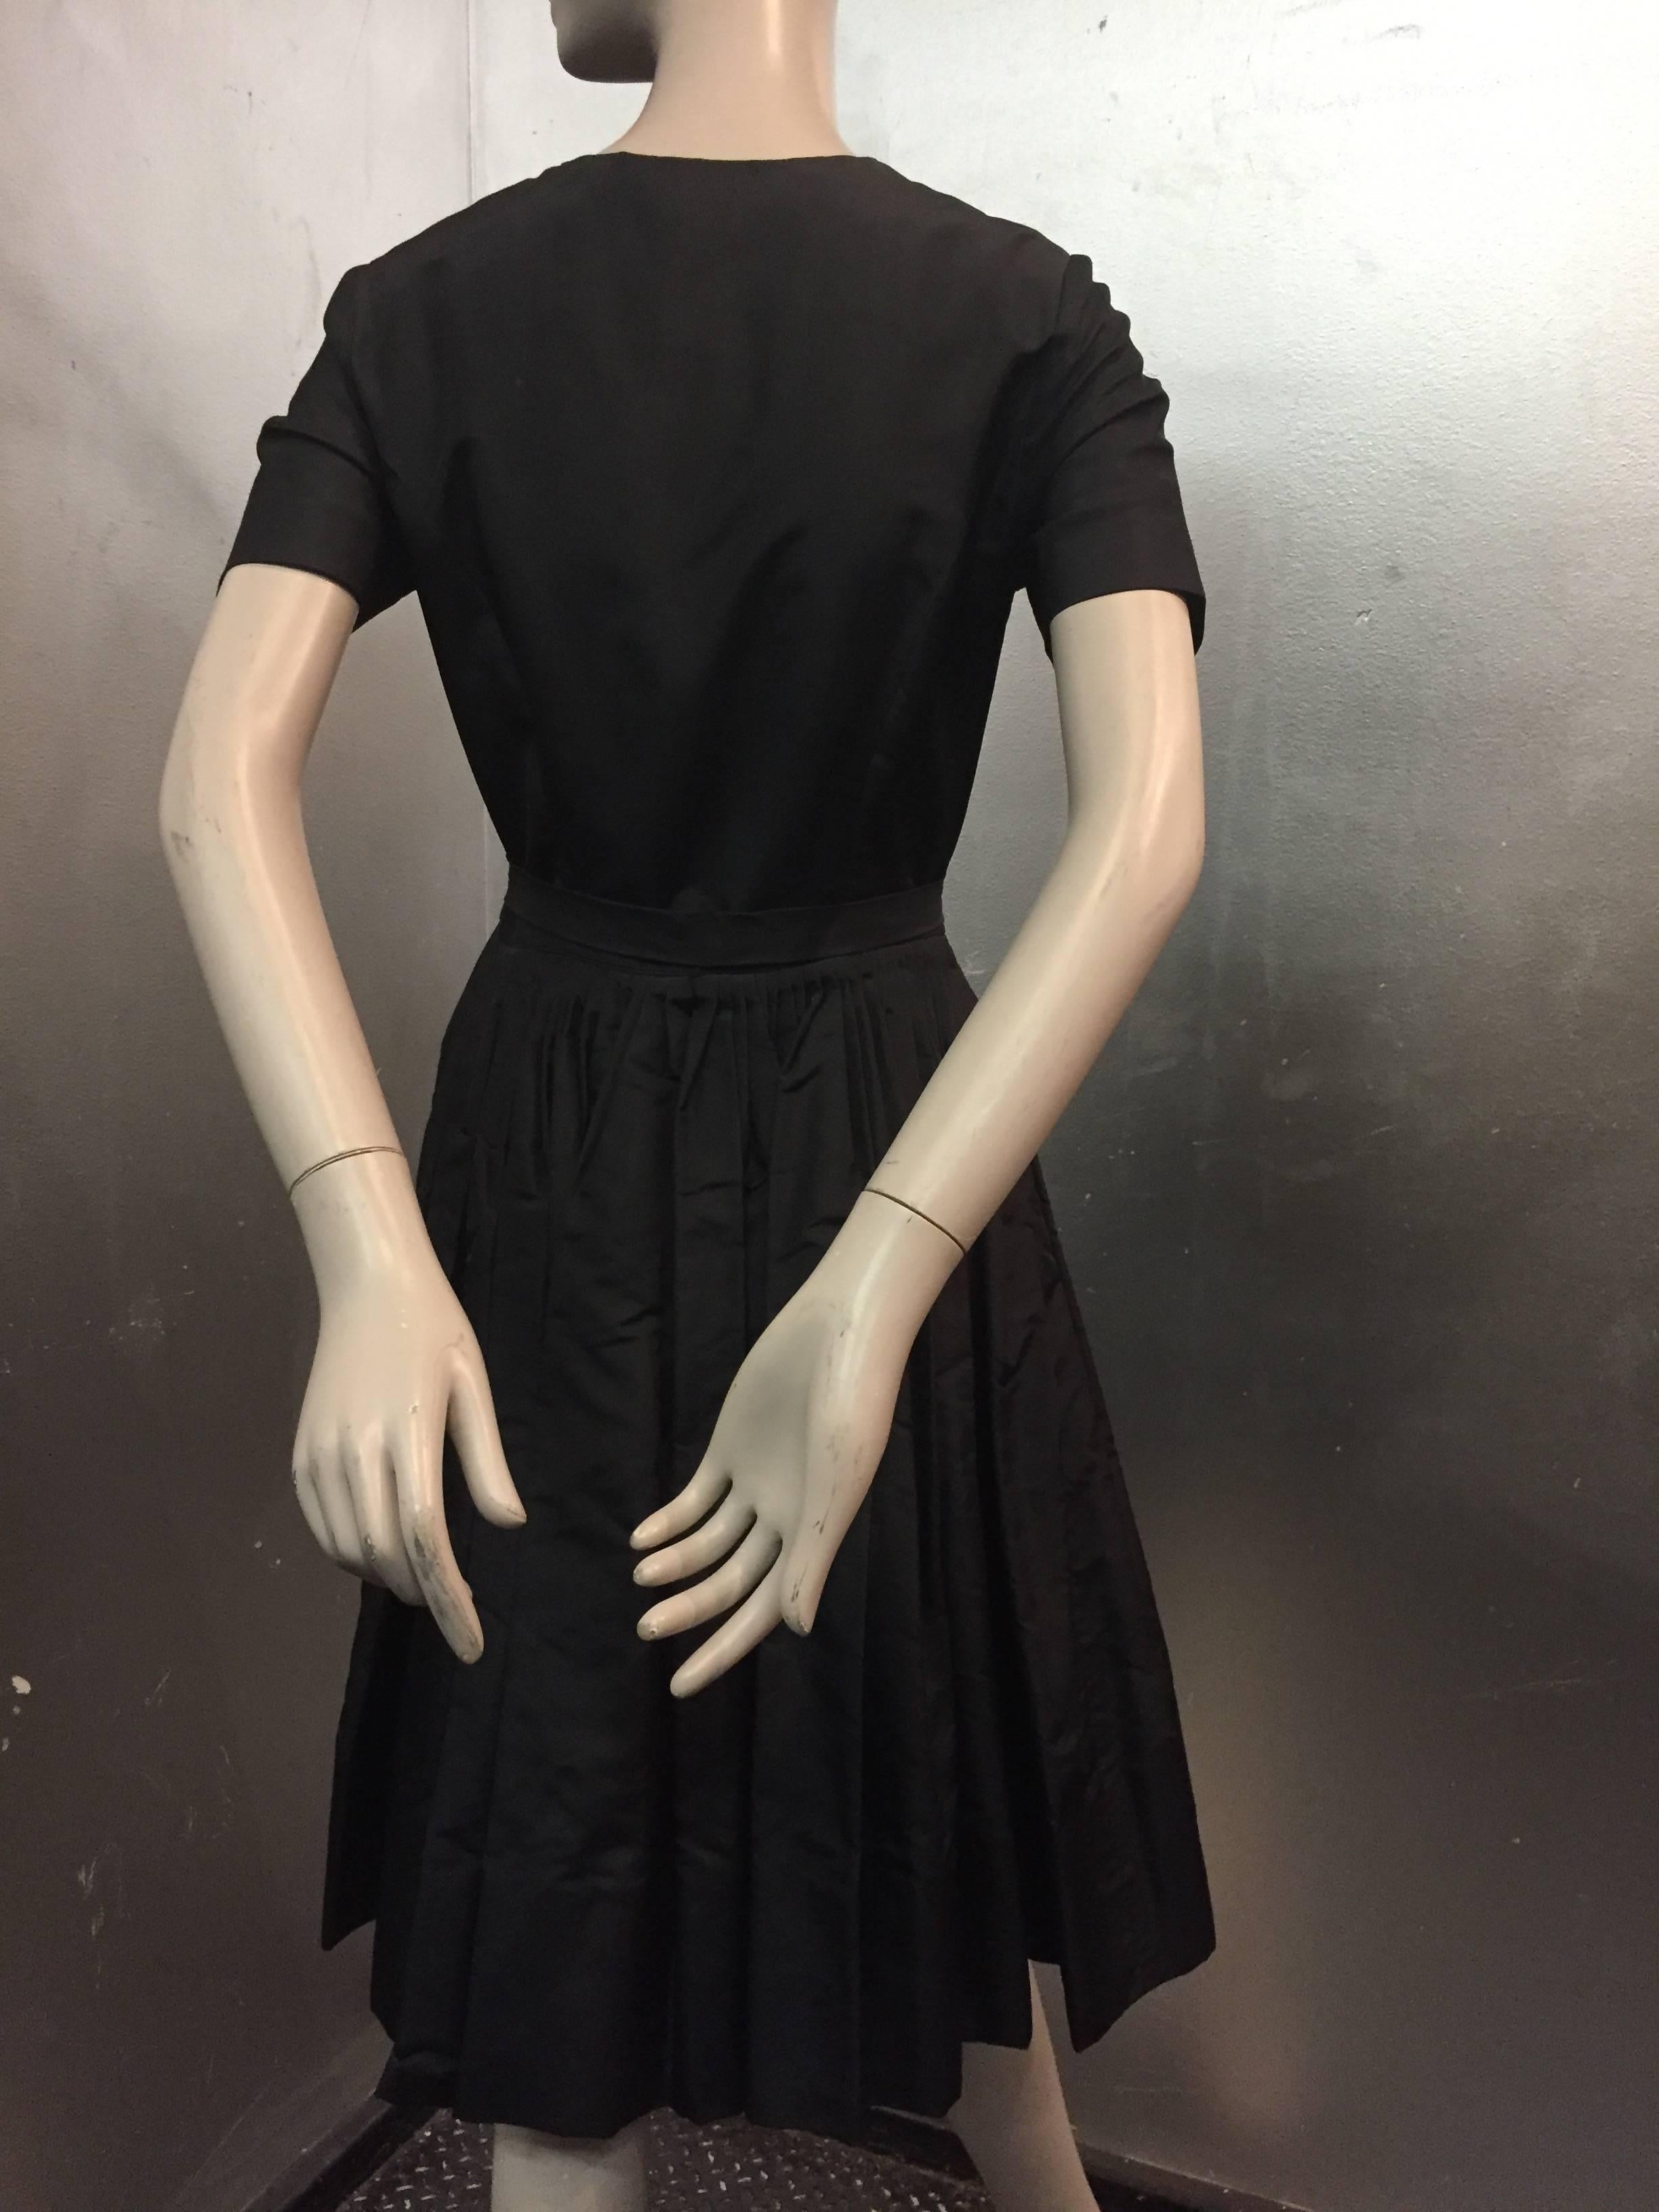 Women's 1950s Gustave Tassell Black Silk Cocktail Dress w Exposed Under-Skirt and Bow